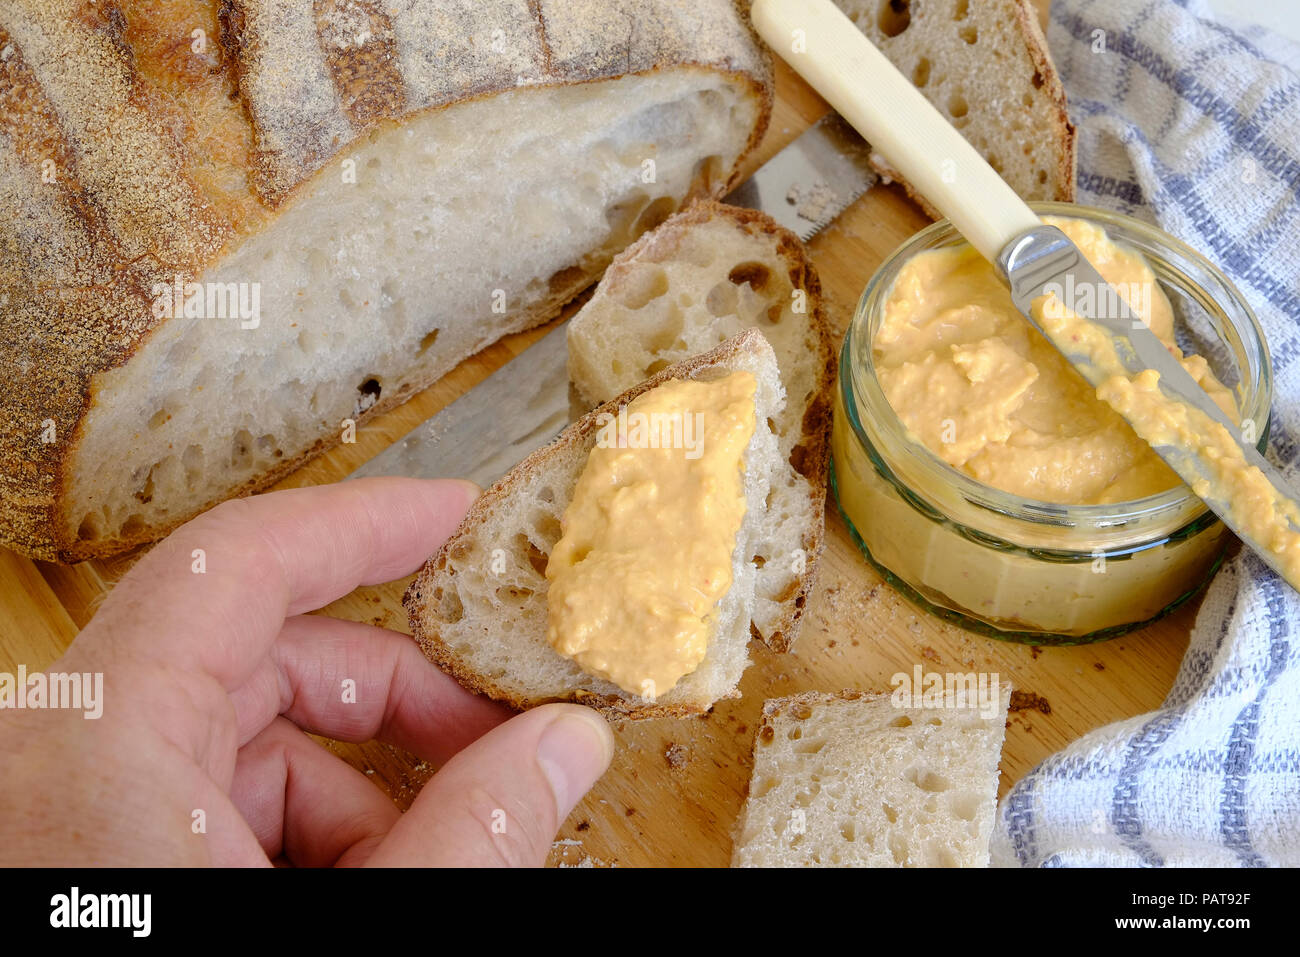 rustic sourdough bread and sweet chilli houmous Stock Photo